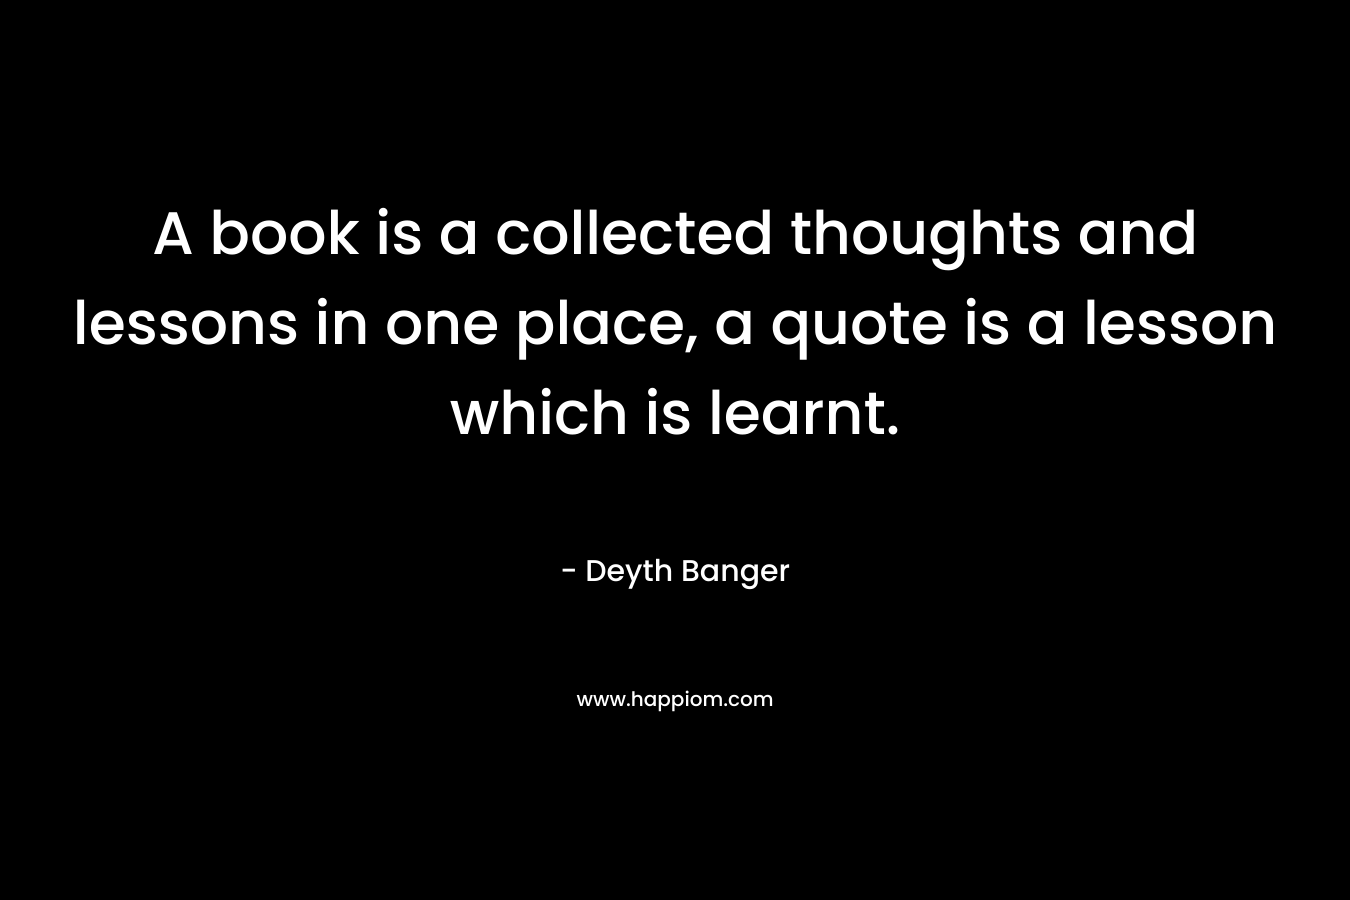 A book is a collected thoughts and lessons in one place, a quote is a lesson which is learnt. – Deyth Banger